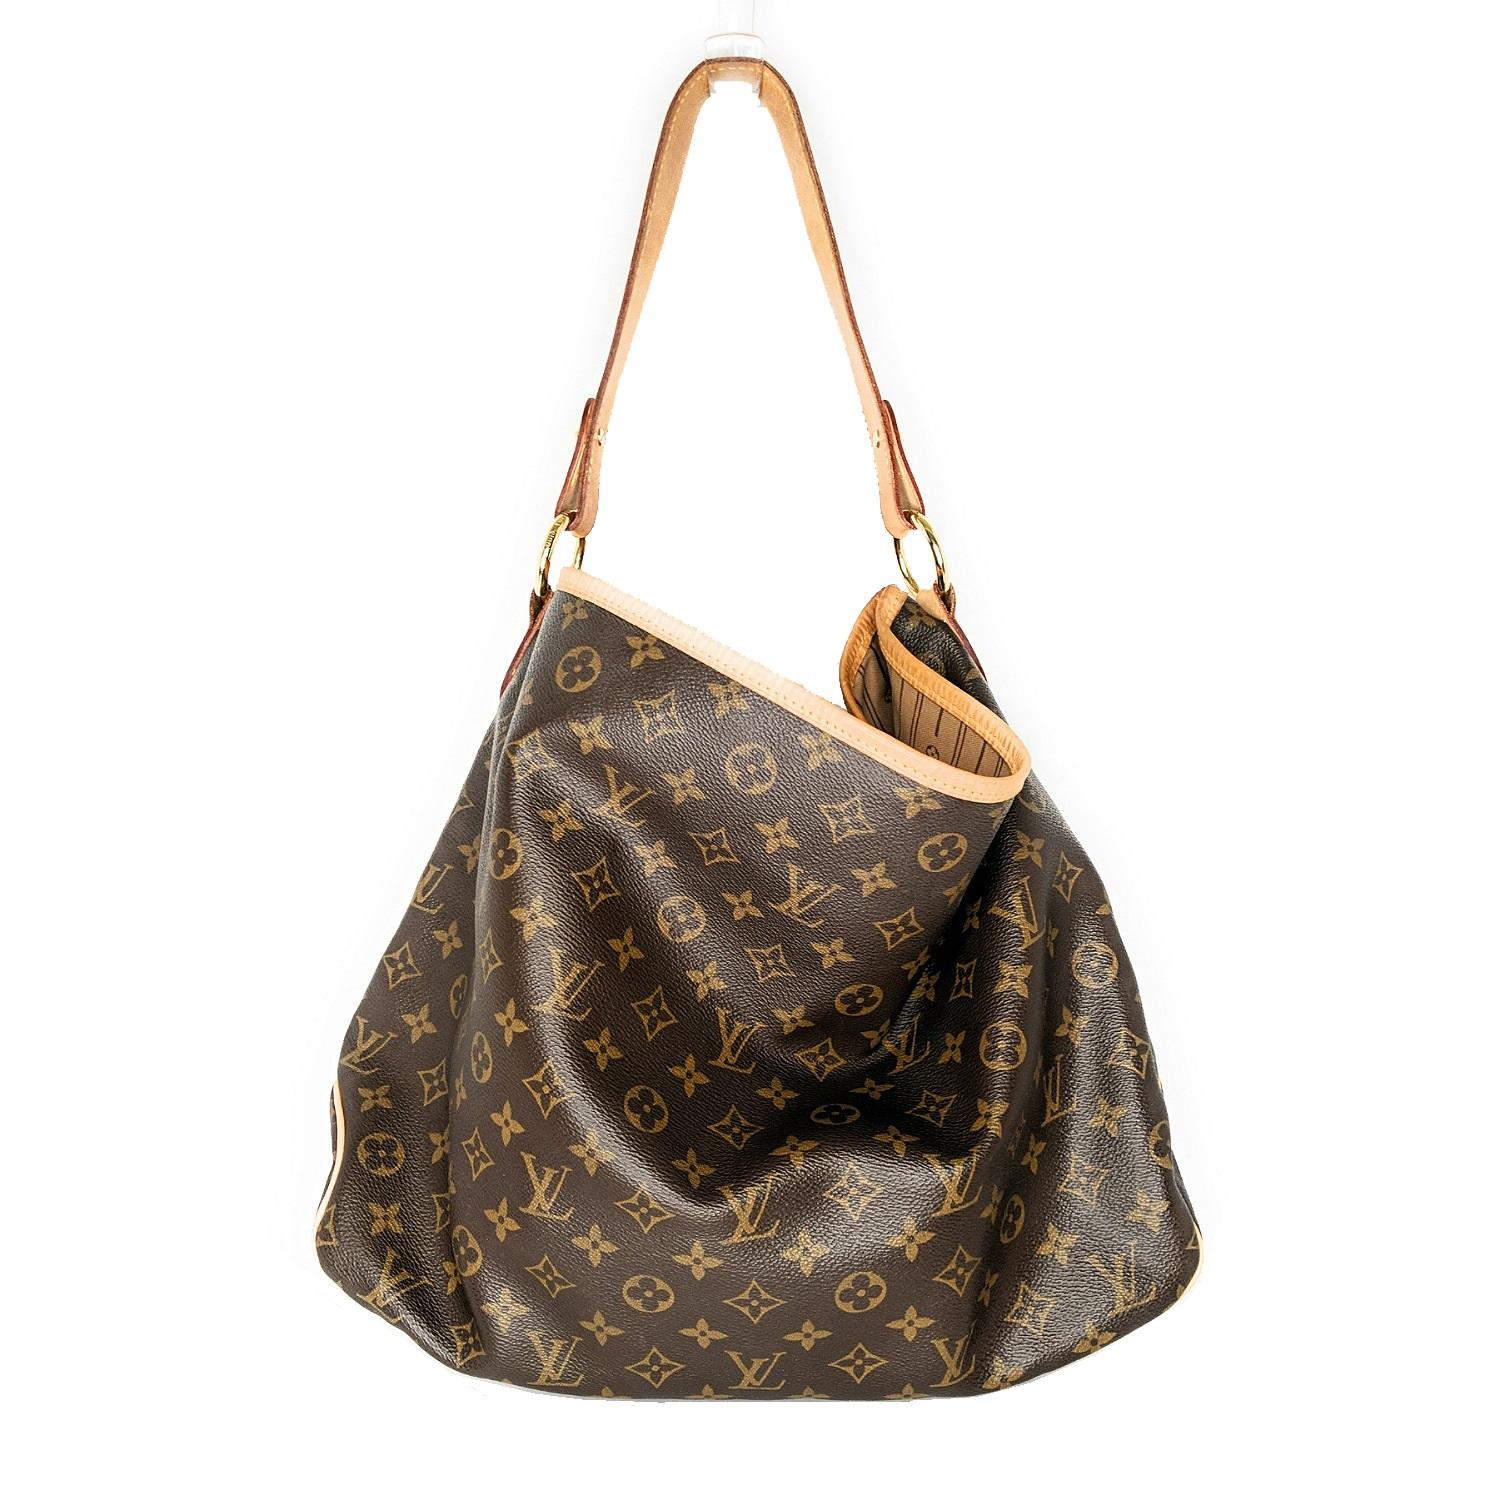 The Louis Vuitton Monogram Canvas Delightful MM Bag is hot off the press from Louis Vuitton and looks down-right glamorous in Monogram Canvas. It features a large yet lightweight design and feel with an extra spacious interior and one large side